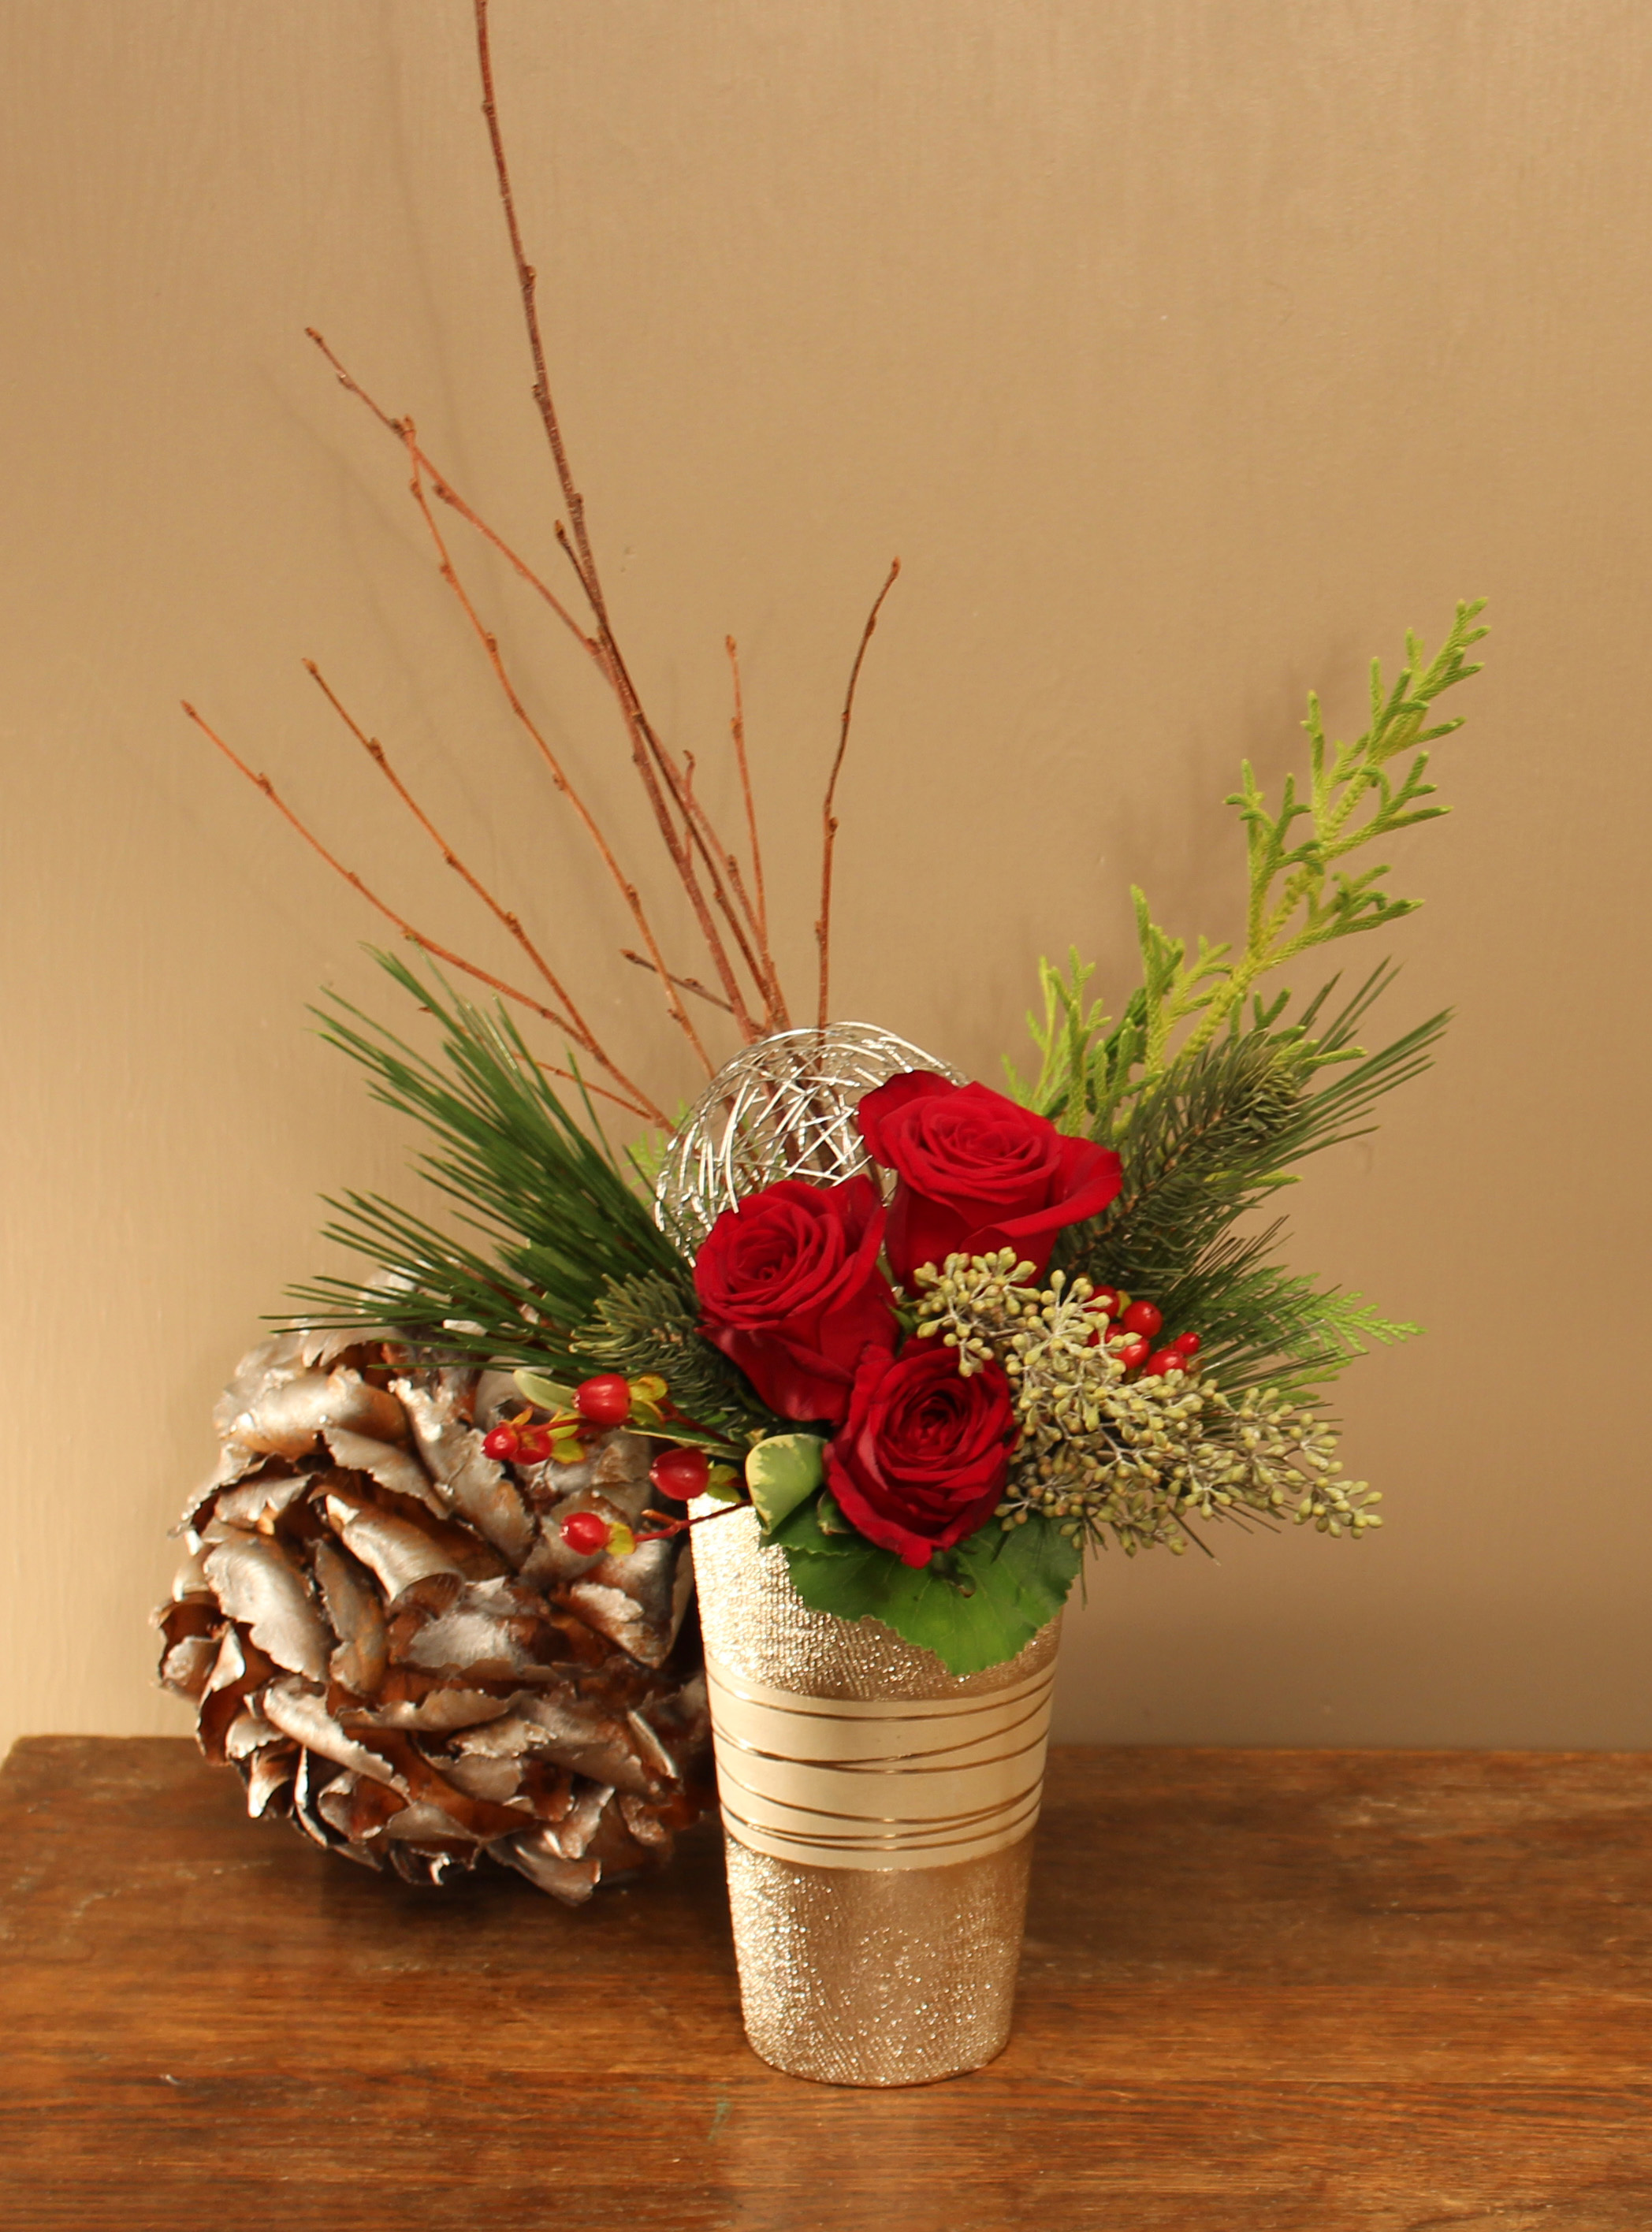 Christmas Red Roses